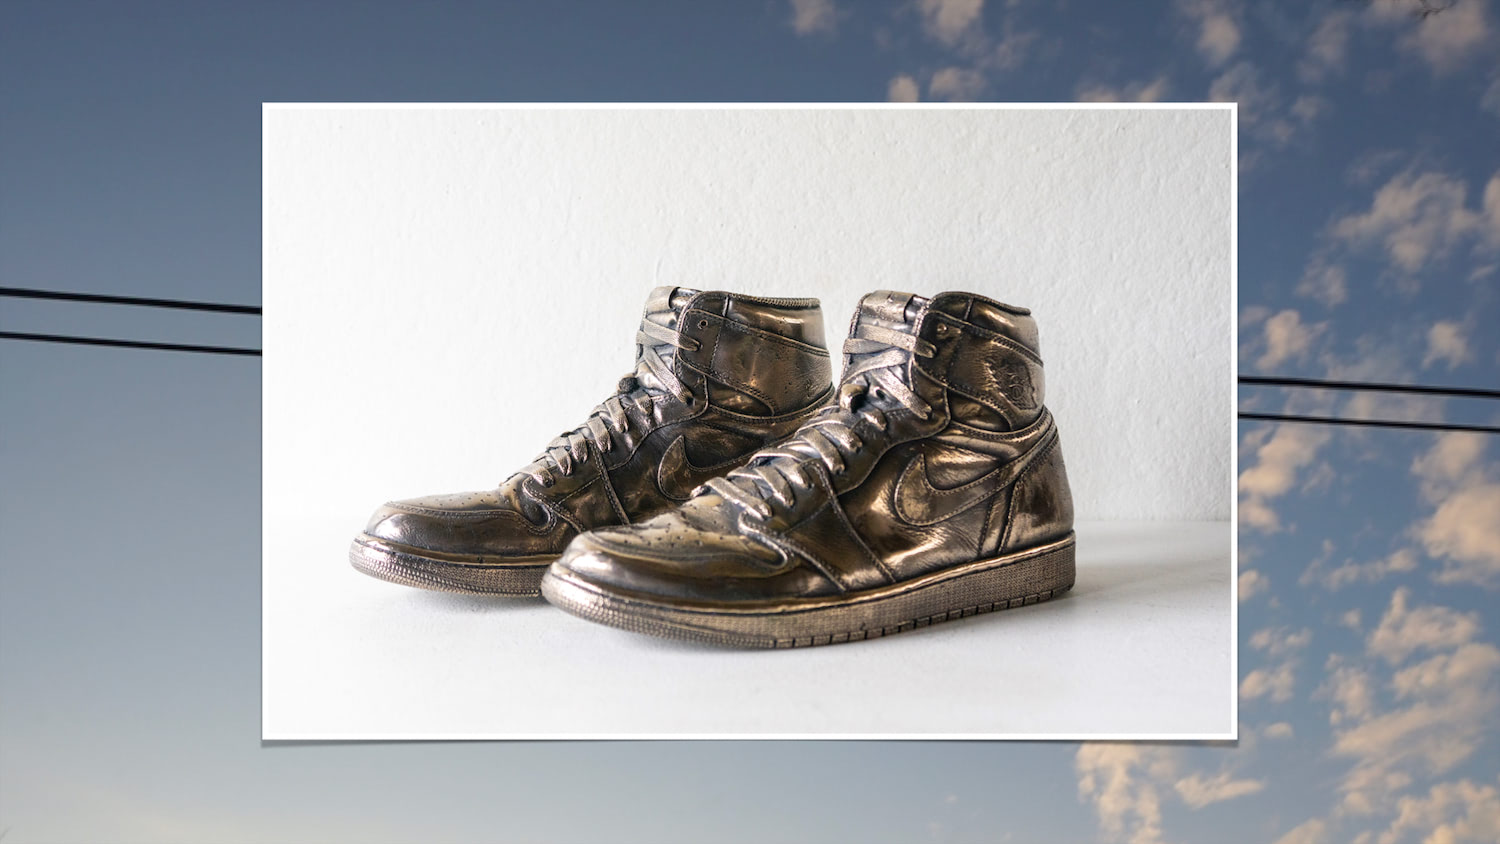 Air Jordan 1's cast in solid bronze, size 12 with blue sky, clouds, and telephone wire.